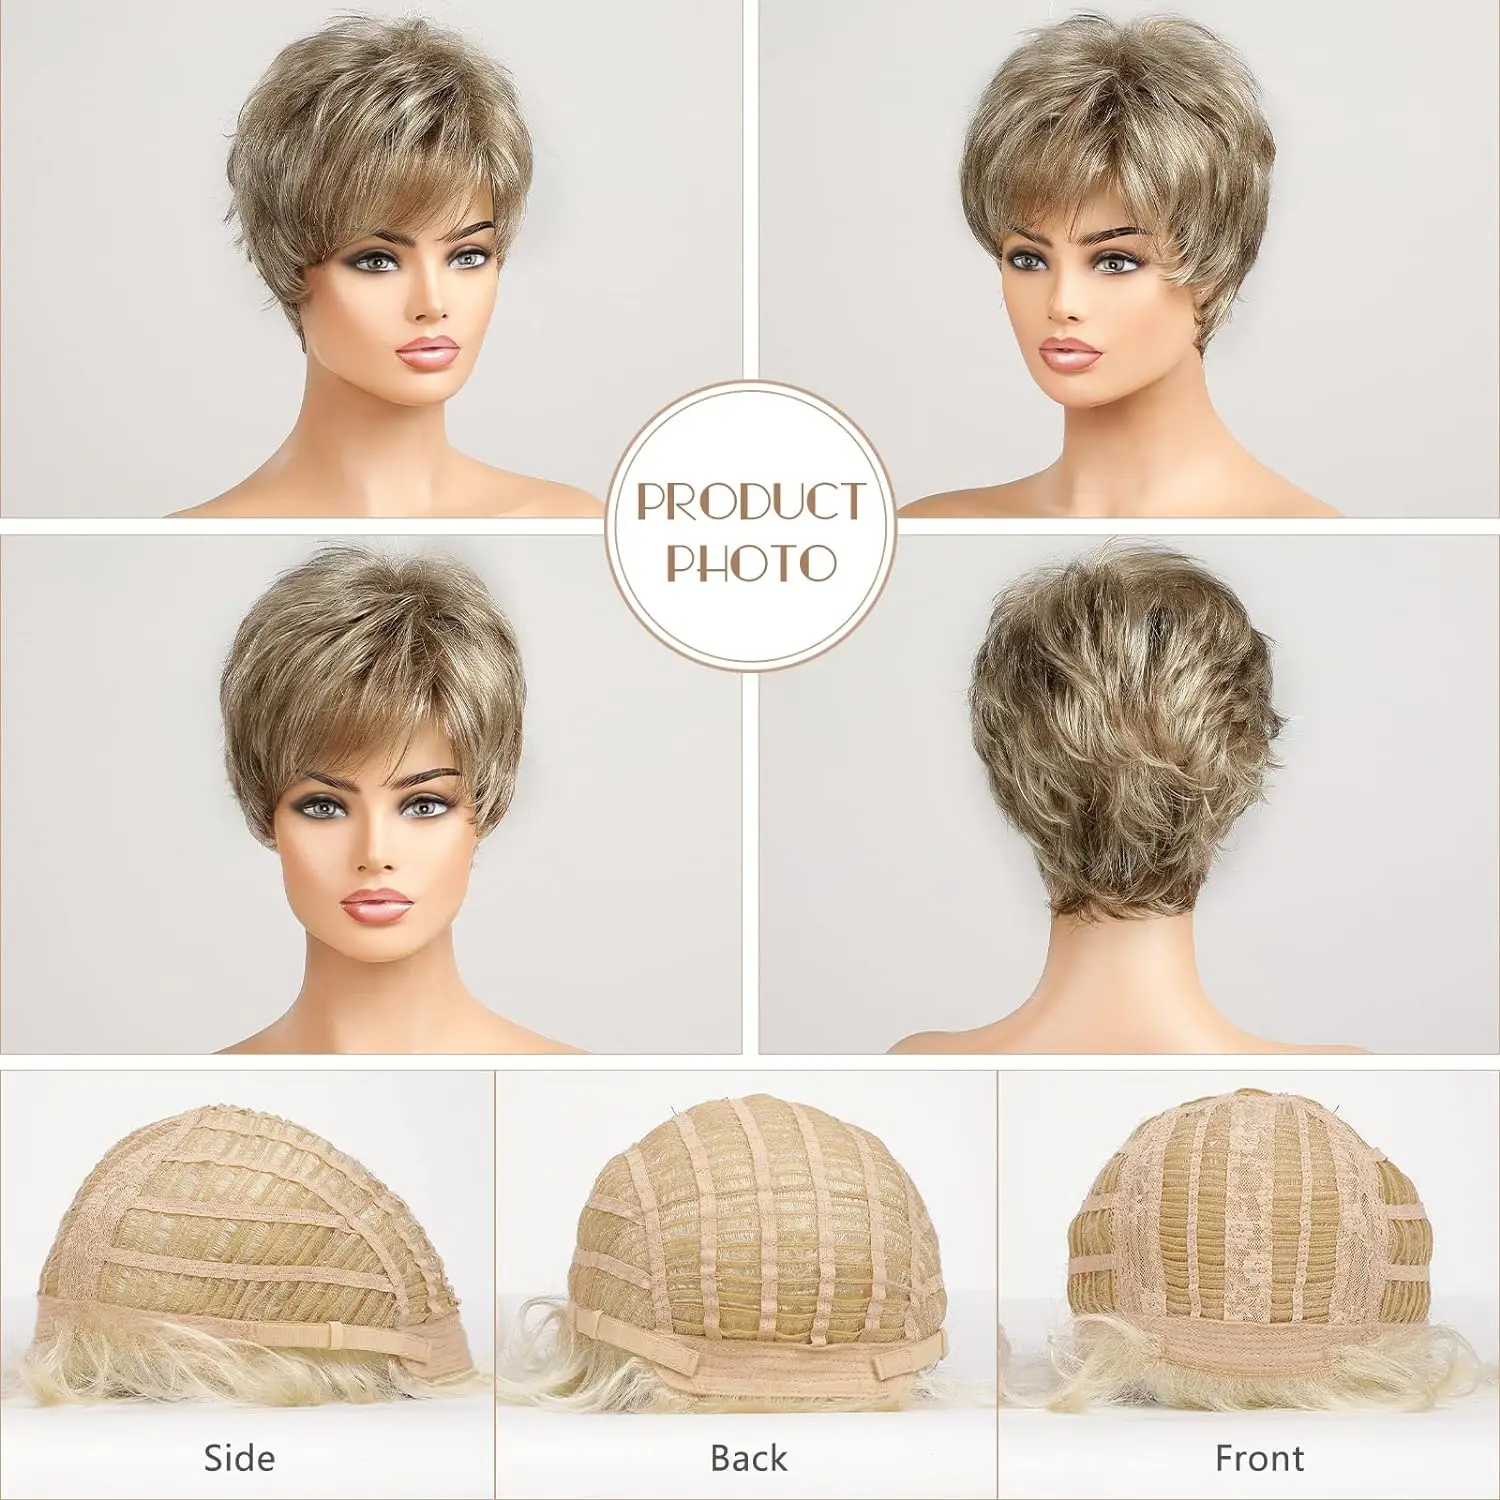 Light Blonde Mixed Off-White Short Pixie Cut Wigs for Women With Bangs Kanekalon Human-hair Like Texture Natural Layered Hair